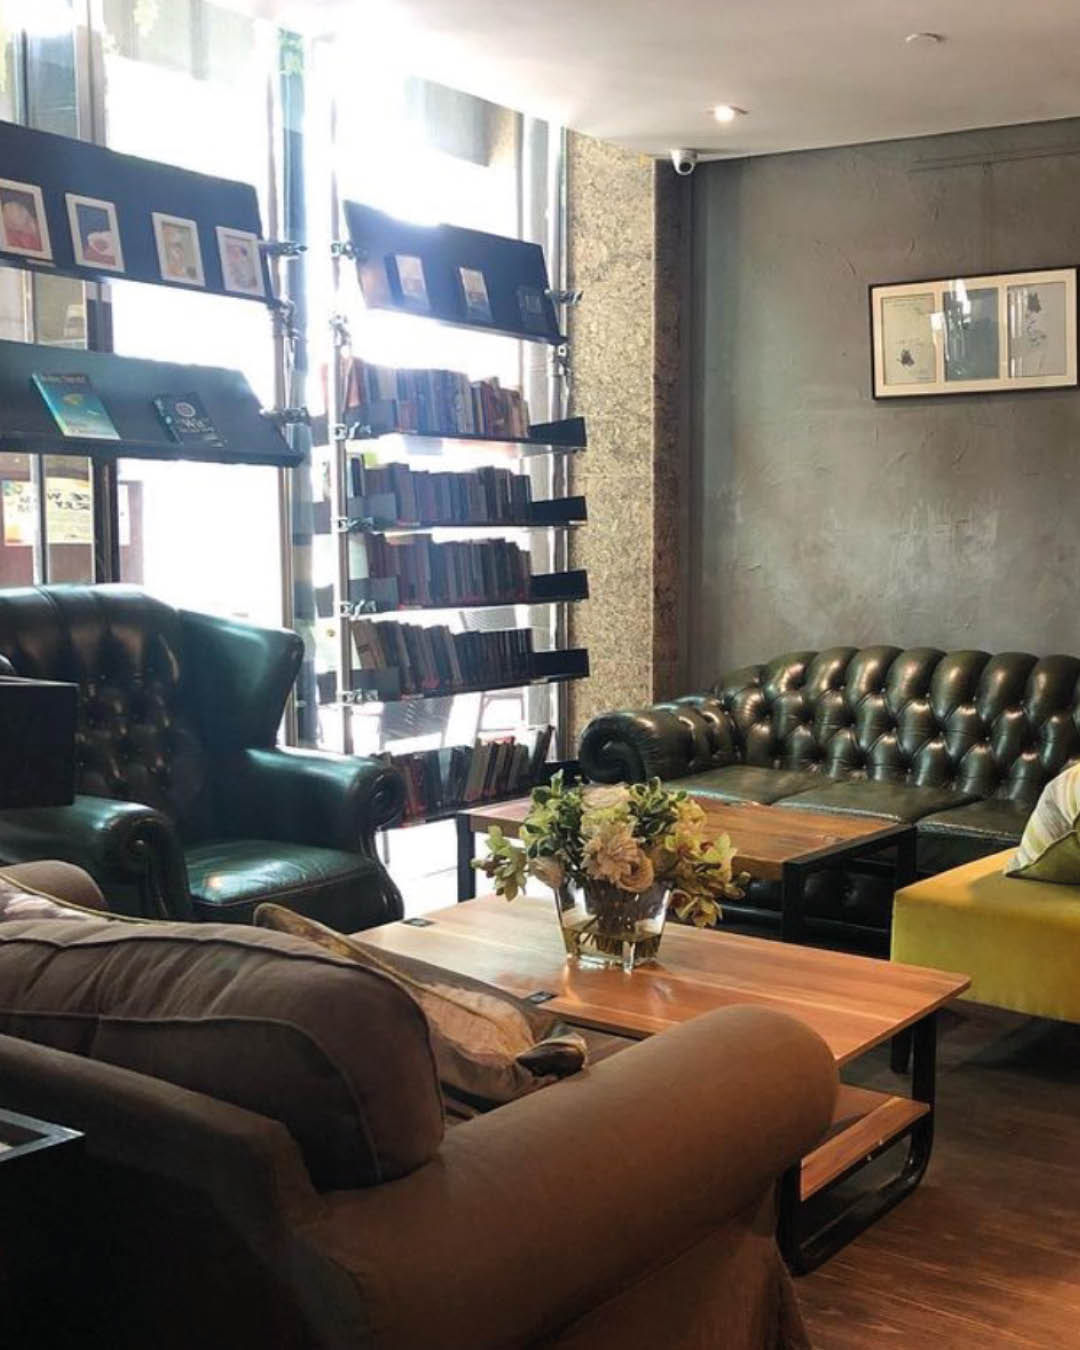 A chesterfield sofa and two arm chairs around a wooden coffee table with book shelves nearby at The Book Cafe, Singapore.